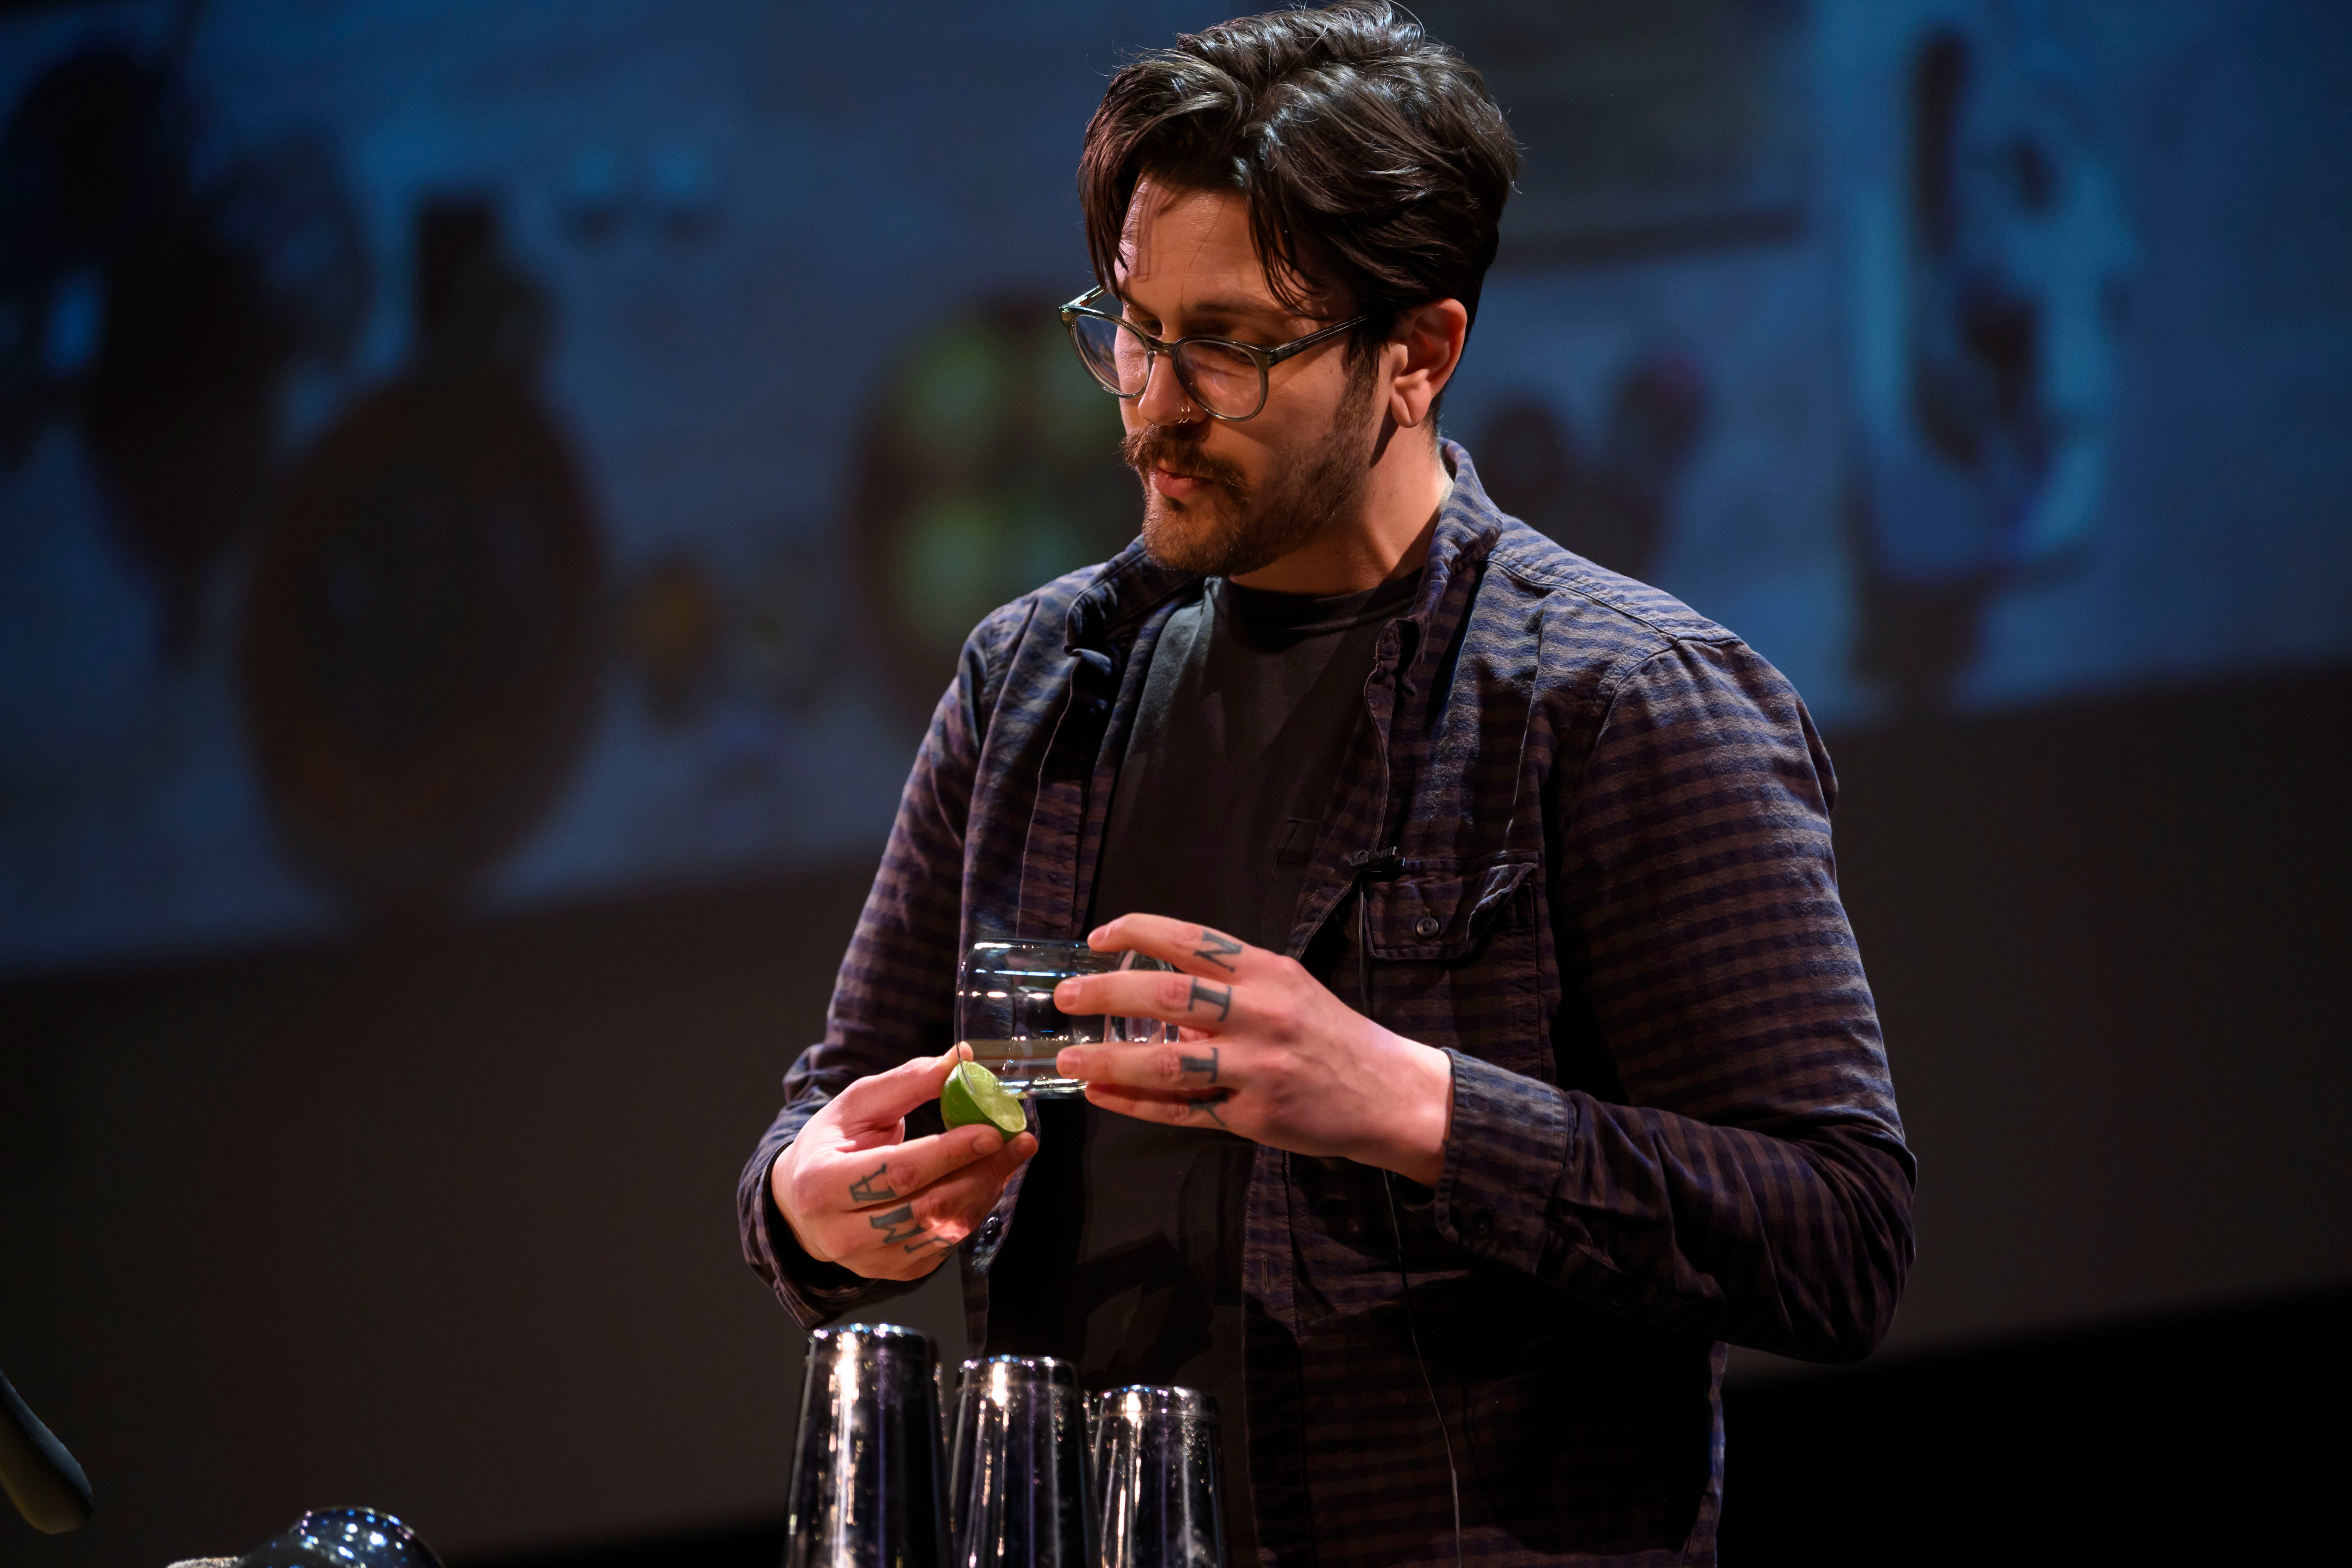 Kyle Marks, of Metropolitan Bar and Kitchen, demonstrates how to make poblano margaritas during the event series Dish and Design, at the Berman Center for Performing Arts, in West Bloomfield, March 20, 2024.